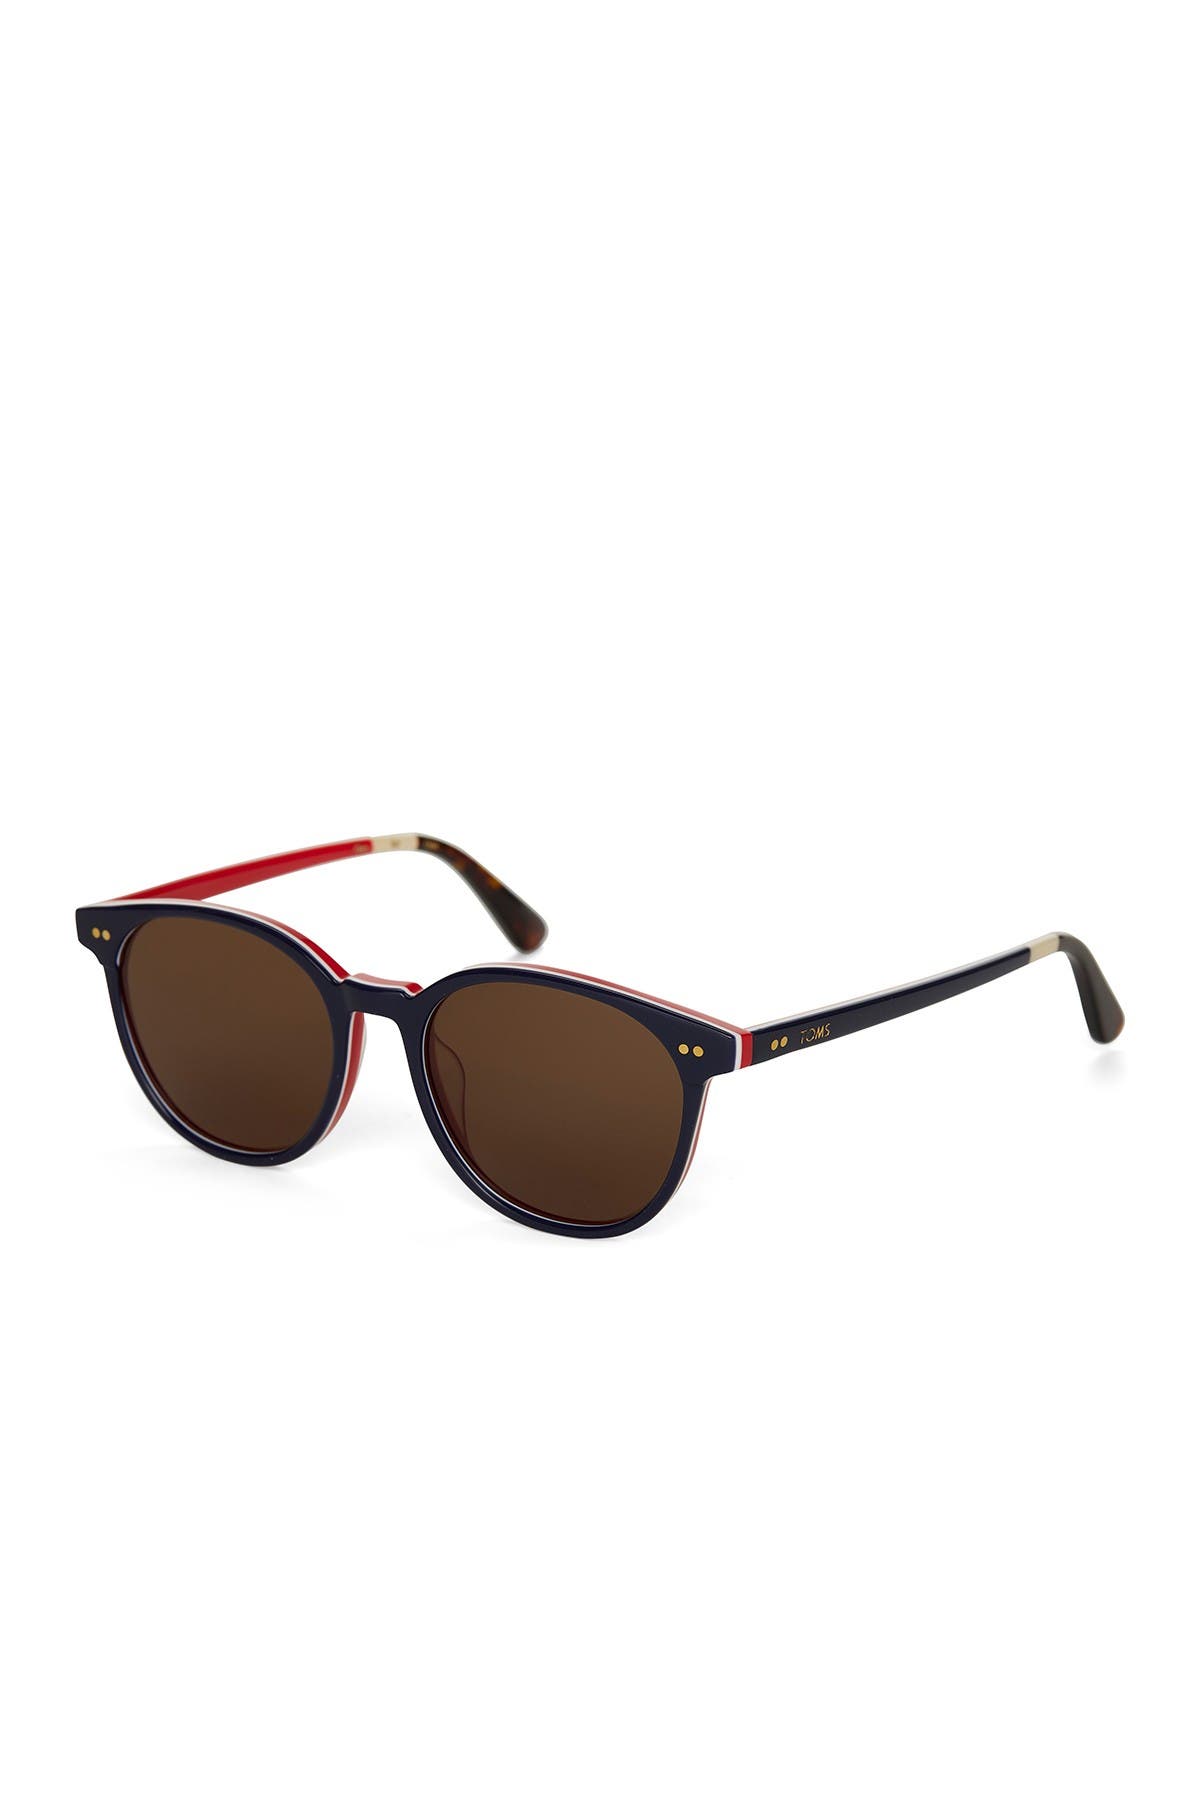 Toms Bellini Polarized 52mm Round Sunglasses In Navy